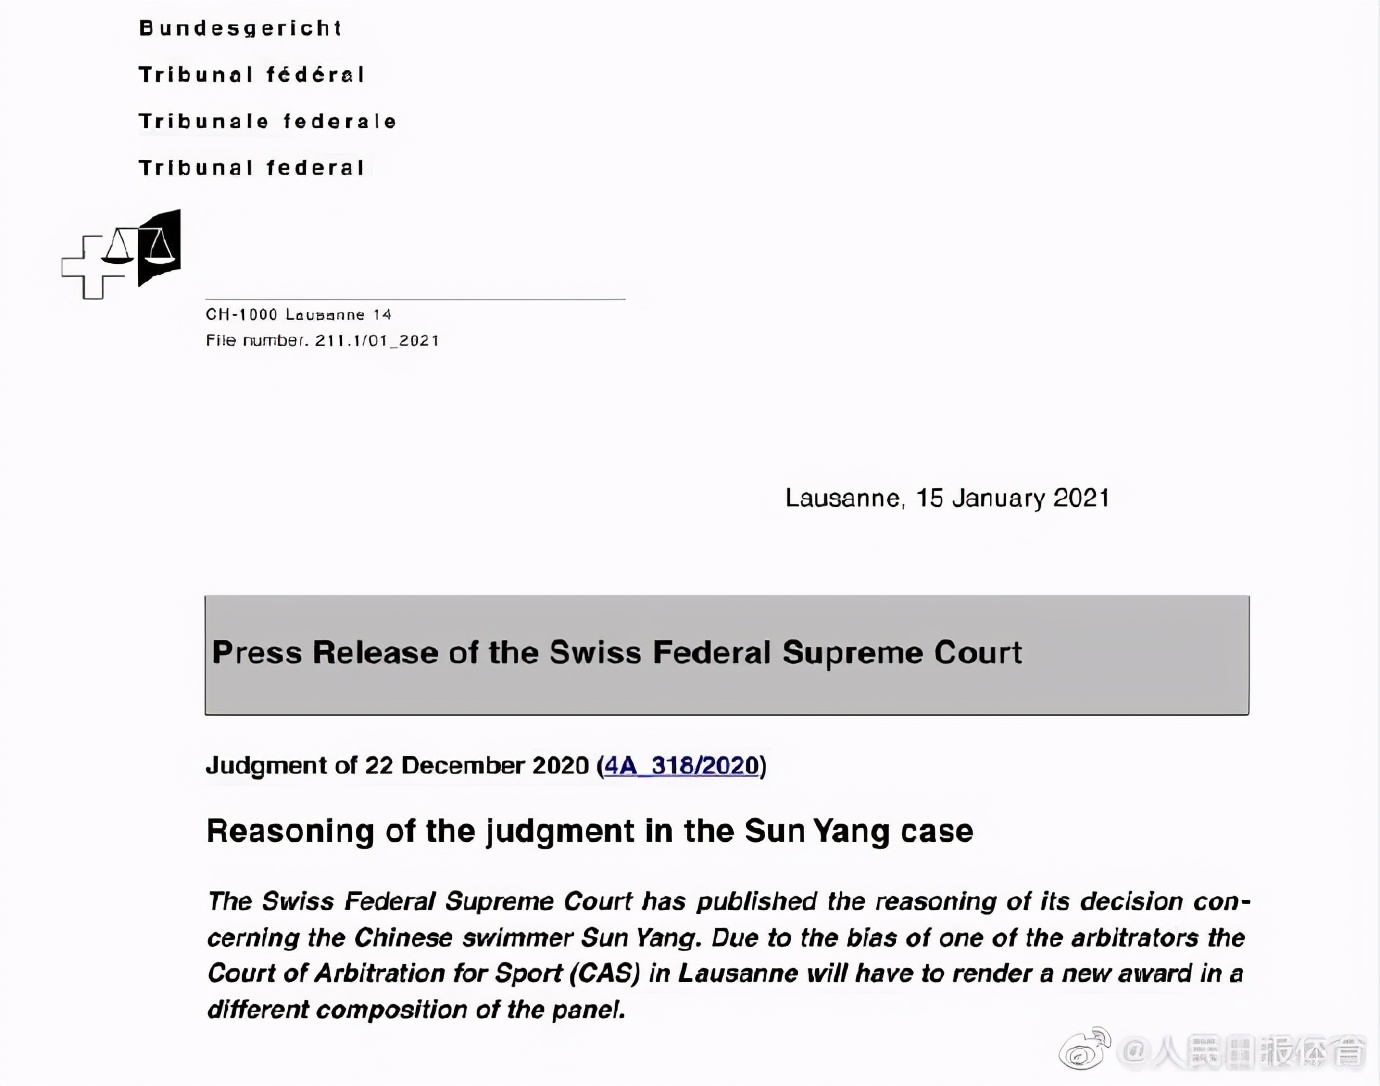 The government announces Sun Yang to ban contest to adjudicate cancel reason: A member that arbitrate is put in bias and discrimination